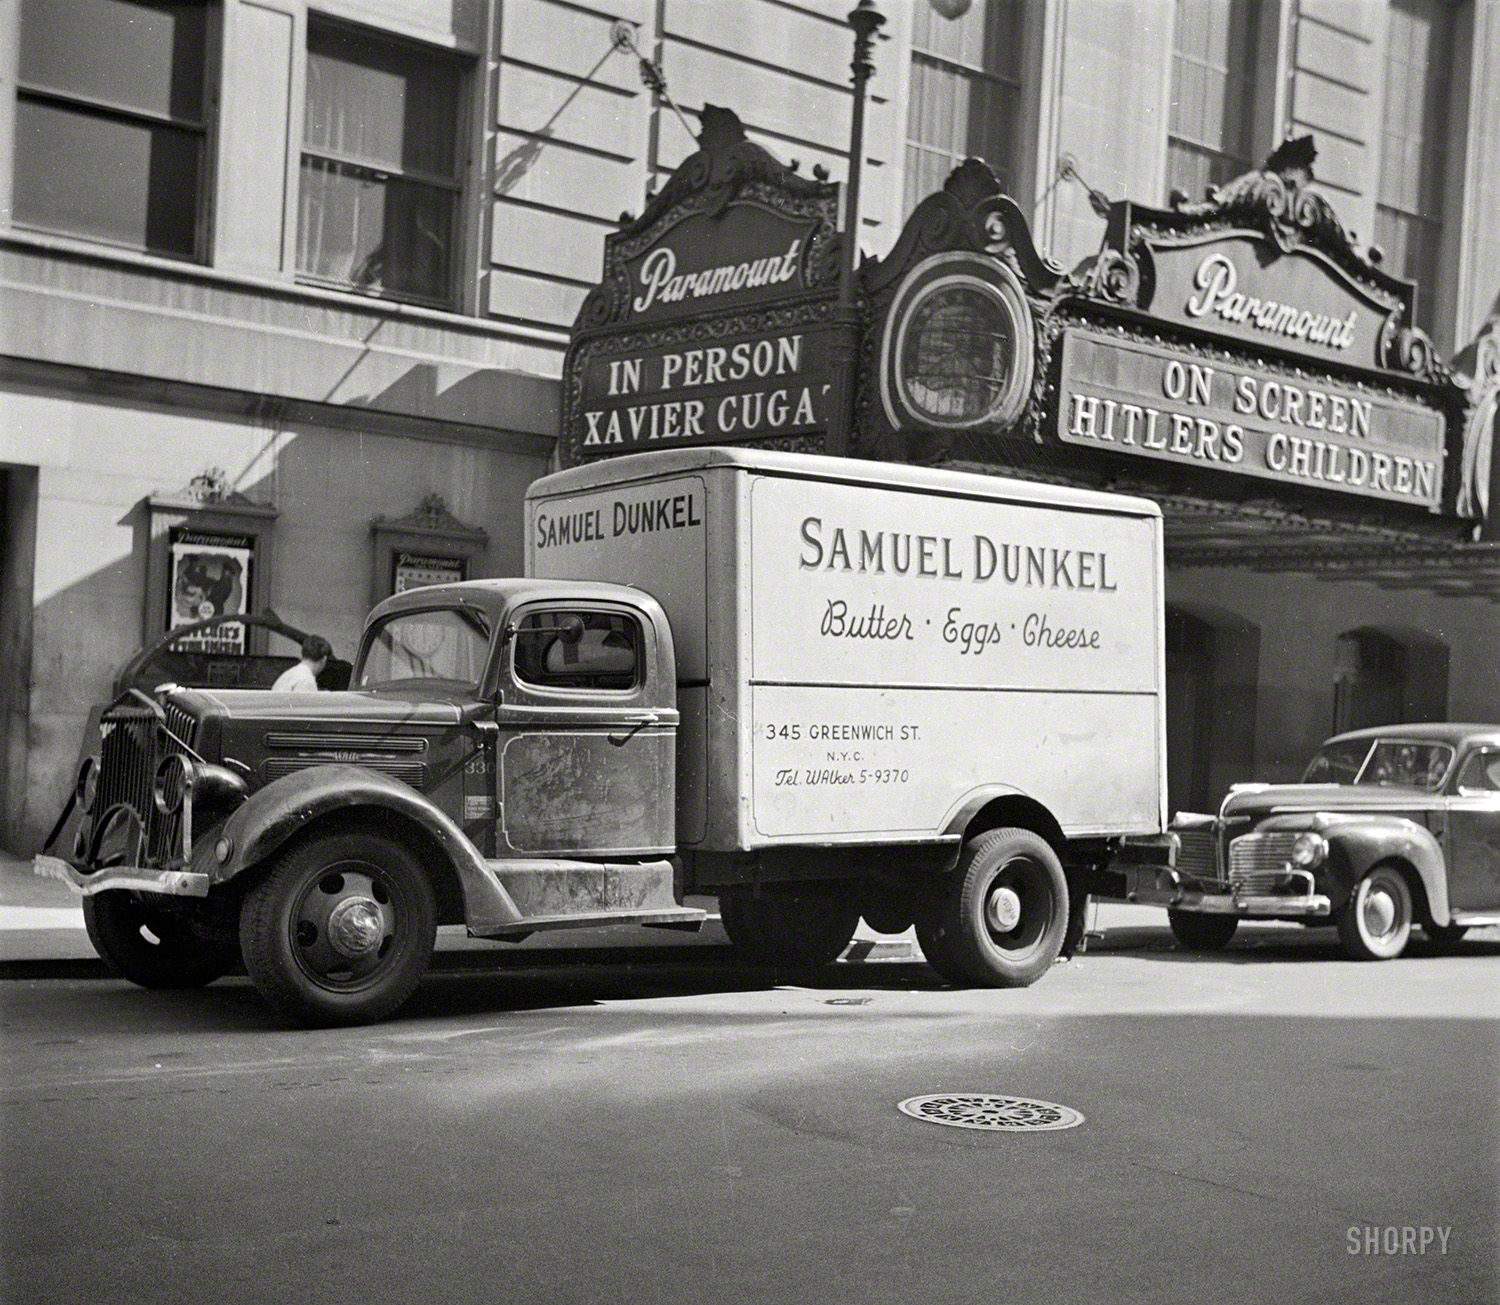 March 1943. "New York. A dairy truck on 44th Street." At the Paramount, a double bill where the distinction between "on screen" and "in person" matters, especially if you're Xavier Cugat. Photo by John Vachon. View full size.